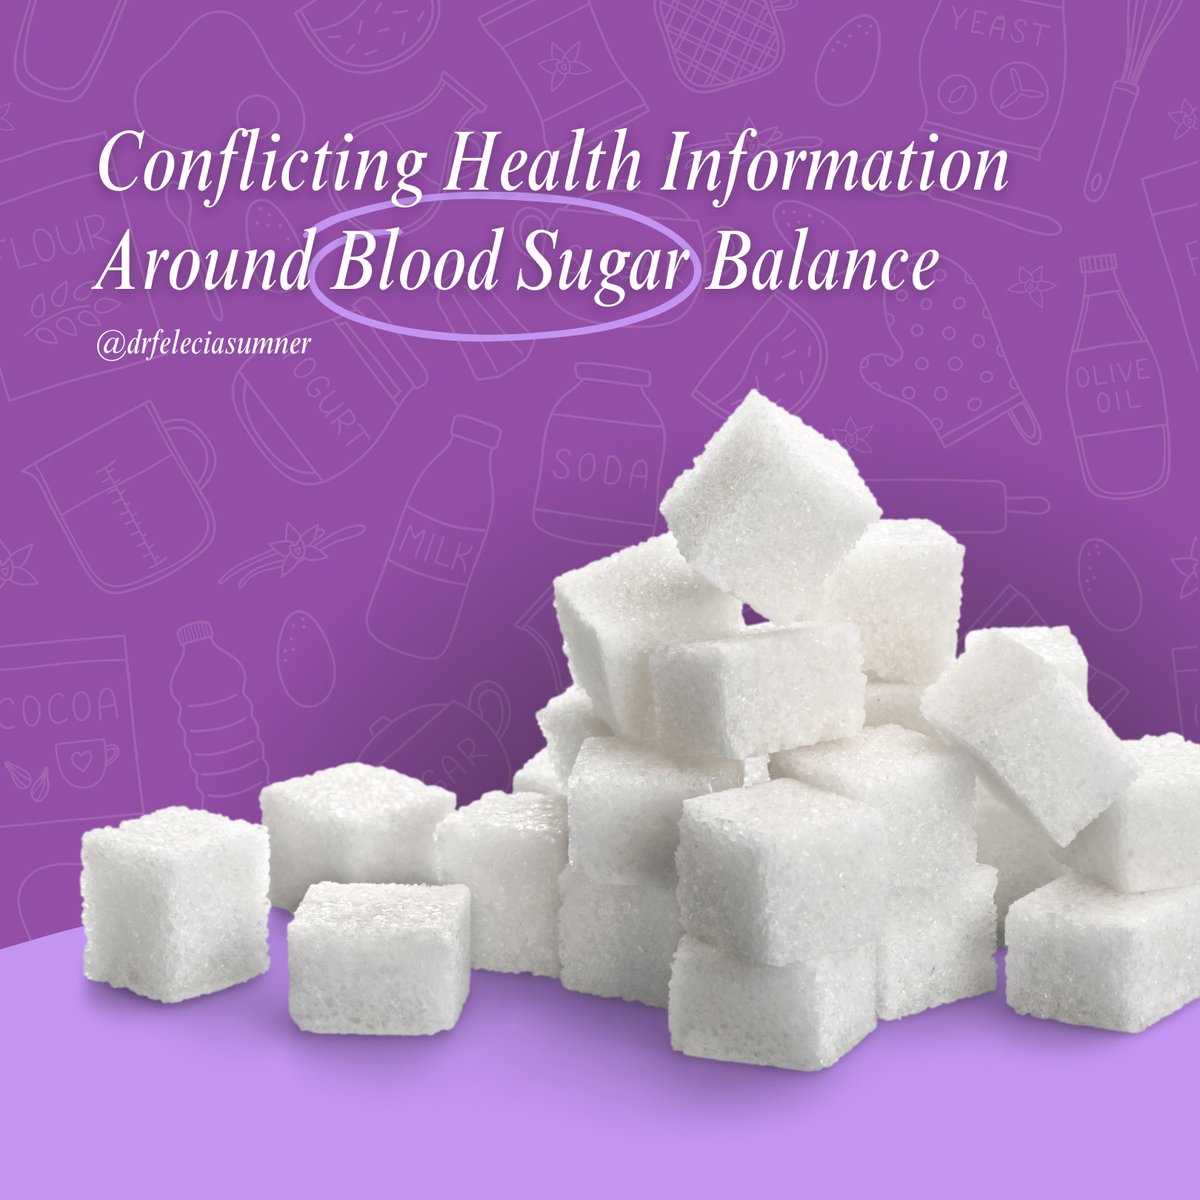 Know someone struggling with blood sugar management? Share this post to help them see there’s a way forward with functional medicine.

#EmpowerYourHealth #BloodSugarBalance #FunctionalMedicine #HolisticApproach #PersonalizedHealthcare #WomenHealth